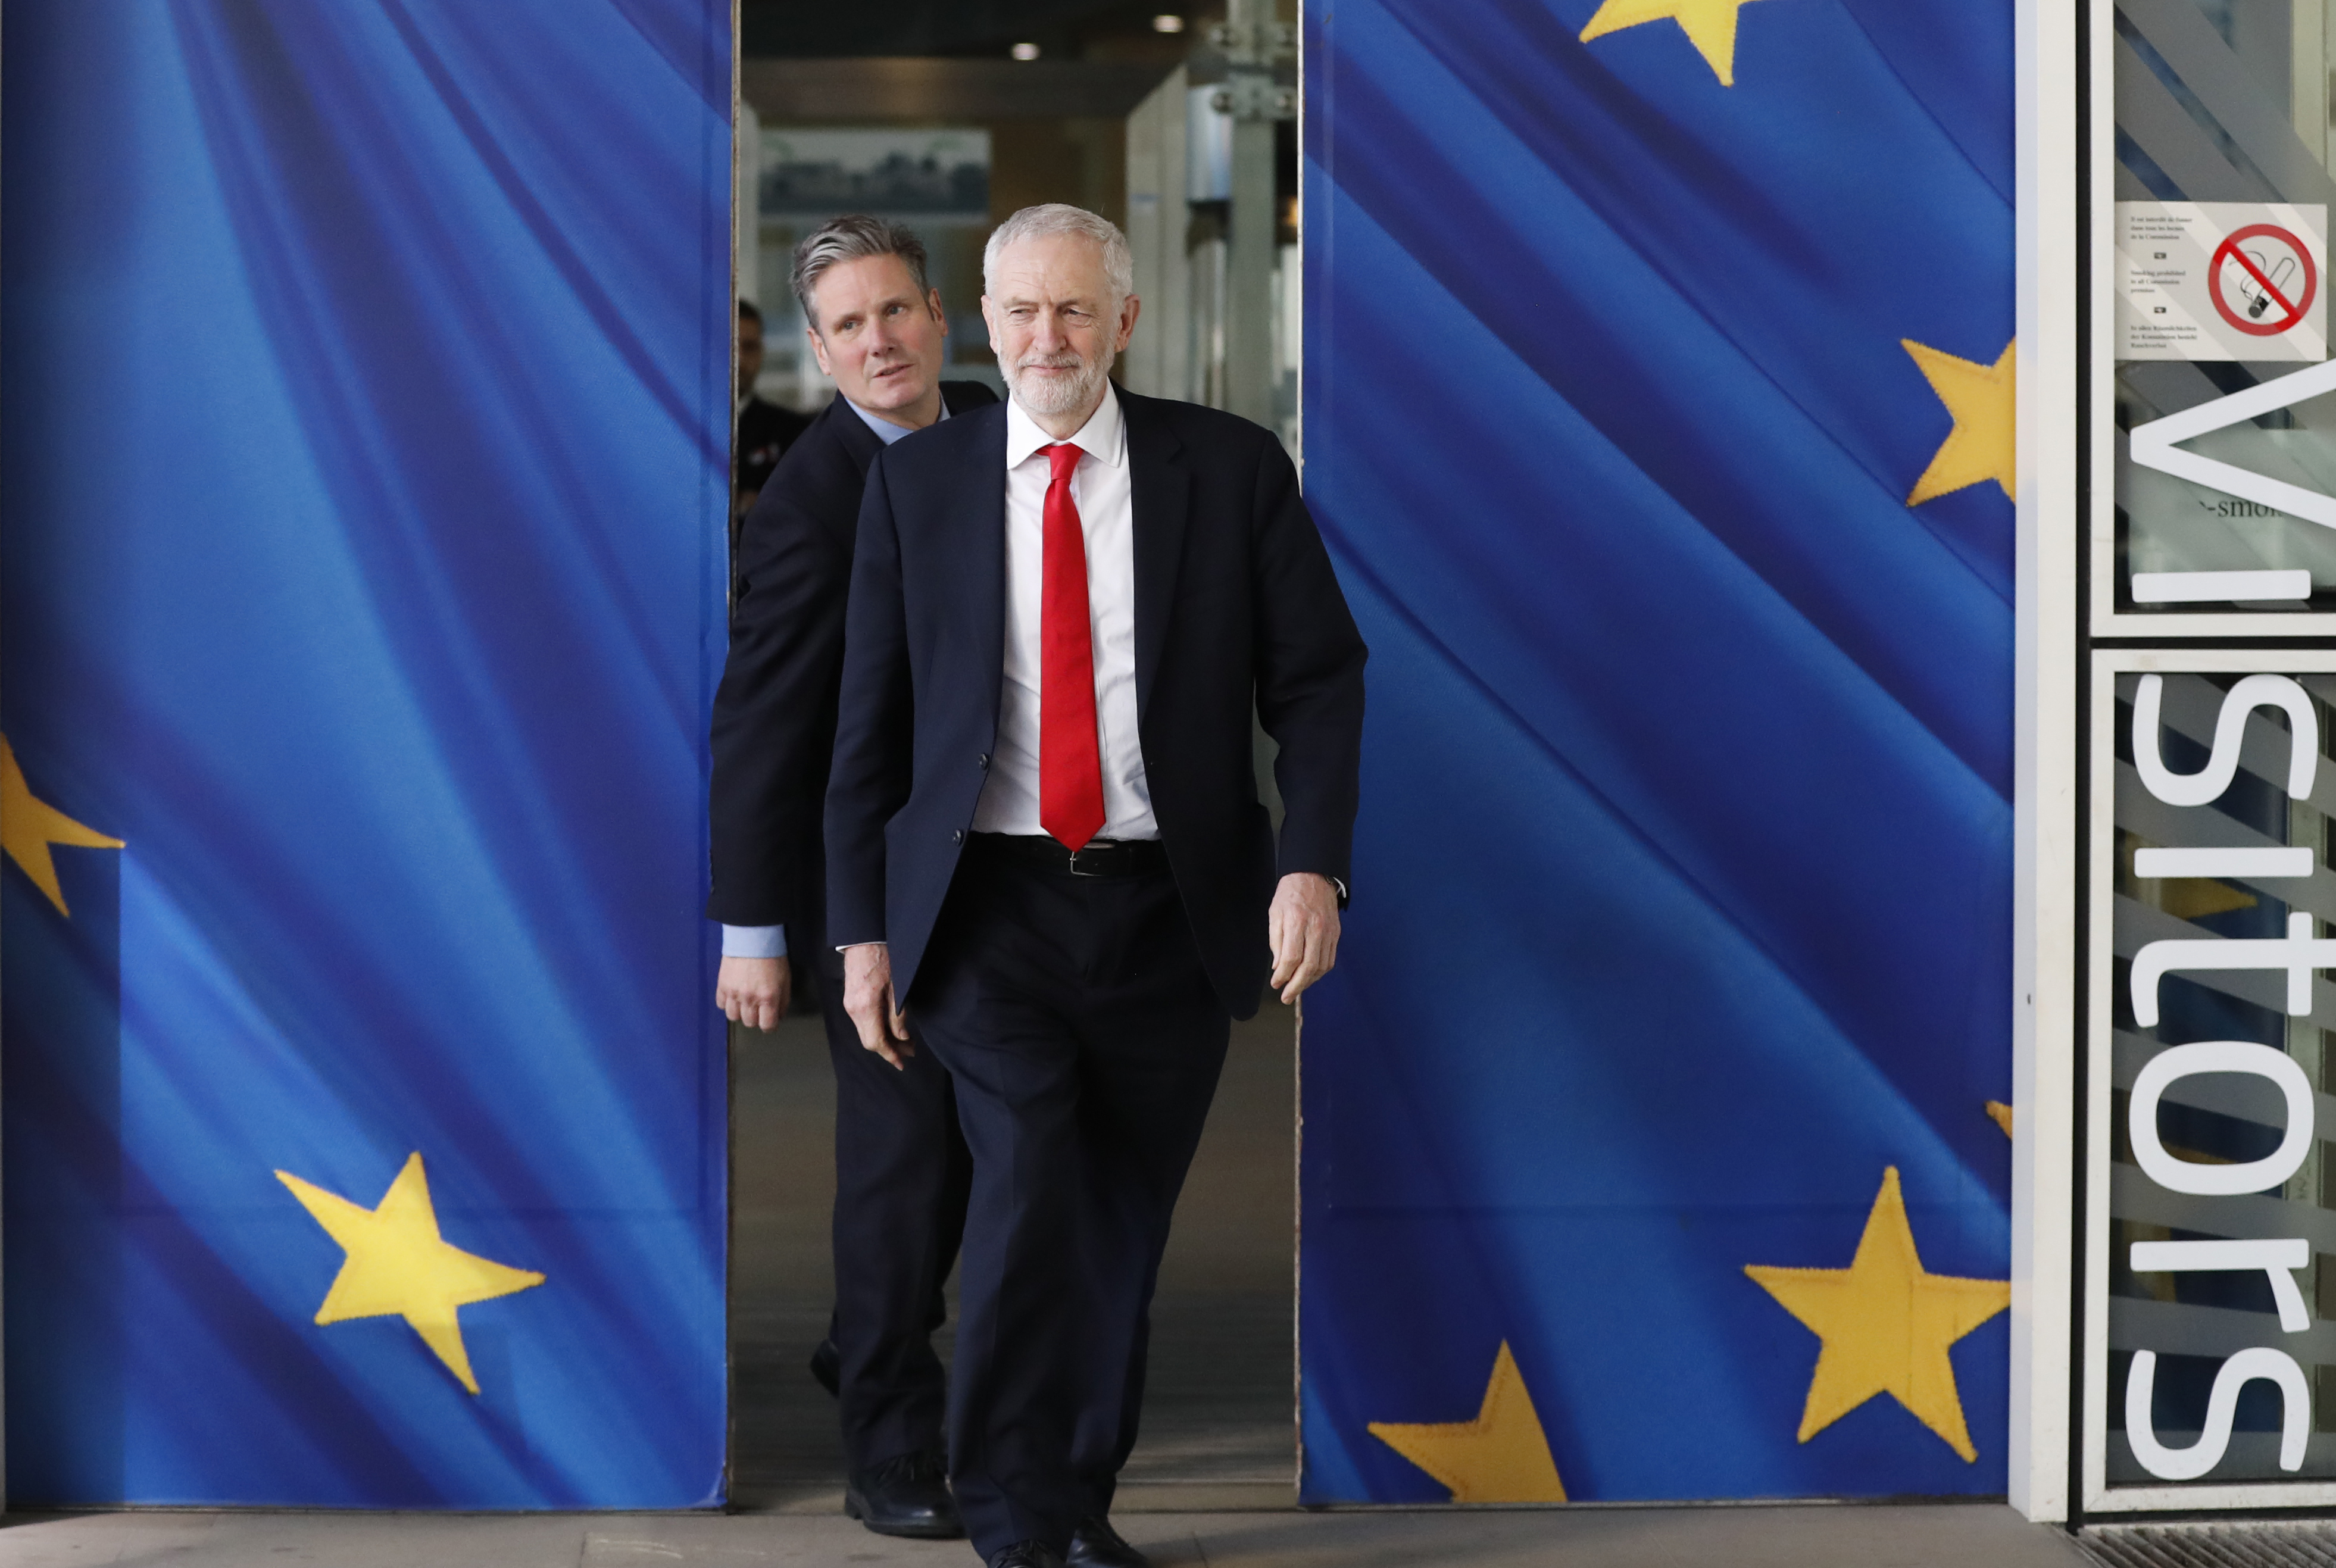 FILE - British Labour Party leader Jeremy Corbyn, right, and Keir Starmer, Labour Shadow Brexit secretary, leave EU headquarters in Brussels, on March 21, 2019. (AP Photo/Frank Augstein, File)